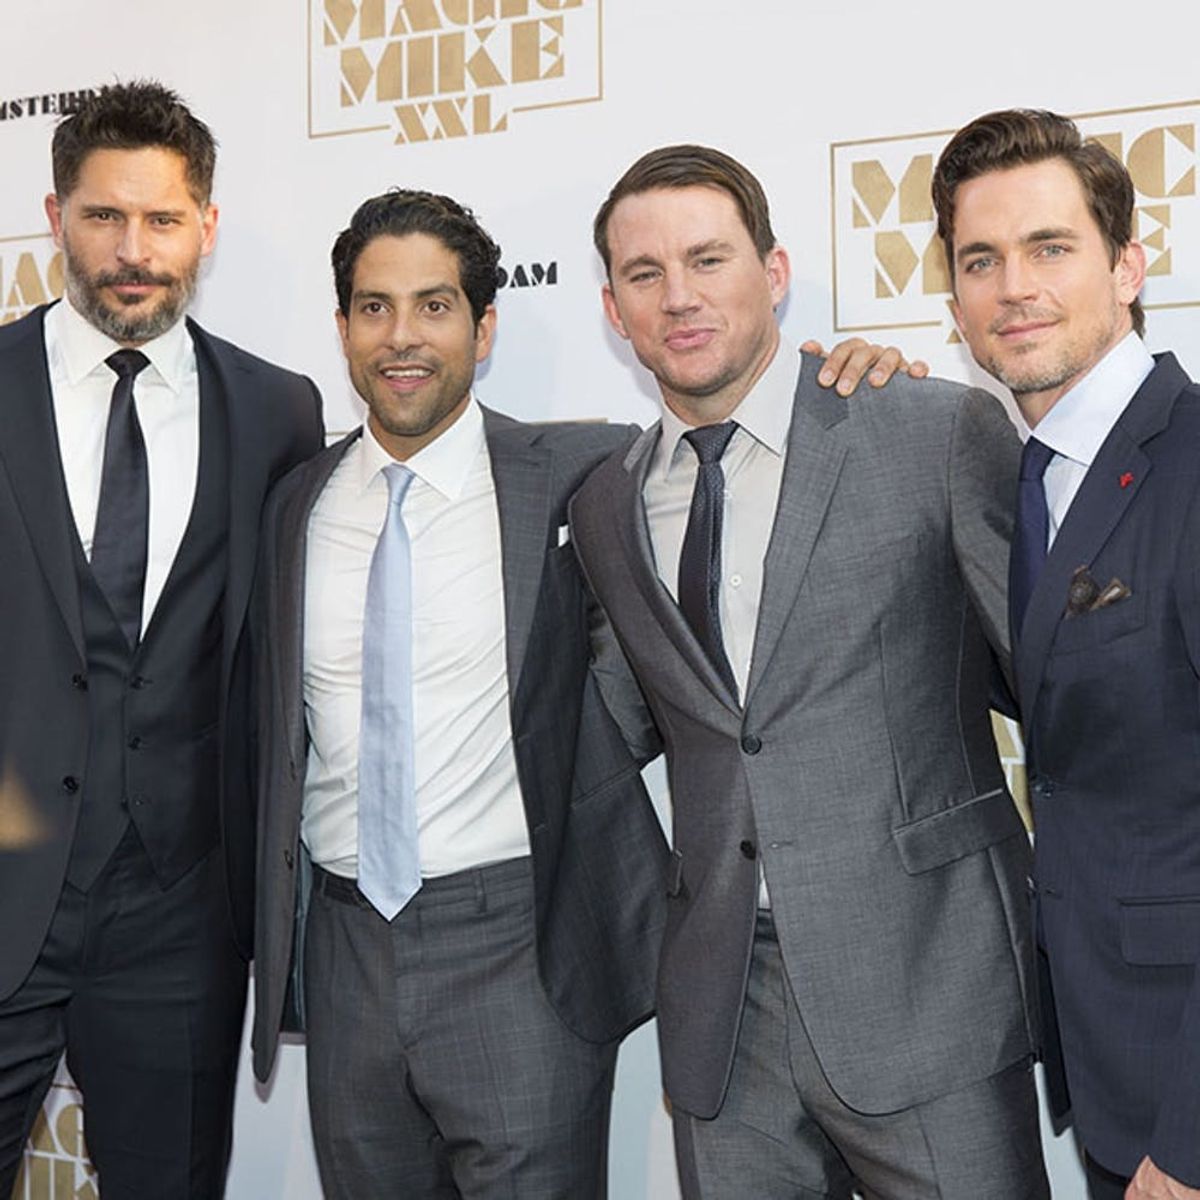 This Is the Steamiest Debate Surrounding the Men of Magic Mike XXL